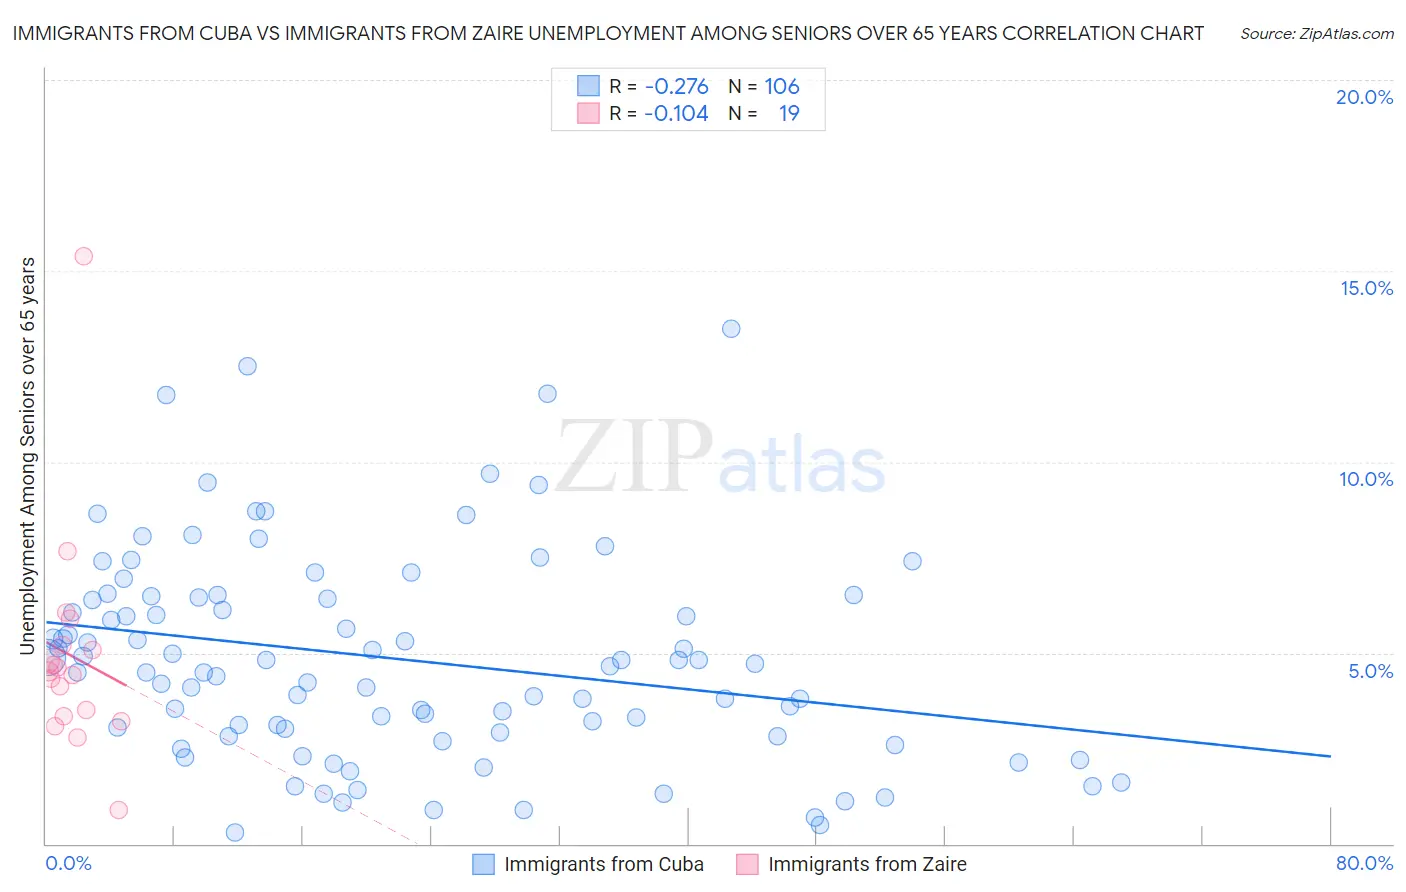 Immigrants from Cuba vs Immigrants from Zaire Unemployment Among Seniors over 65 years